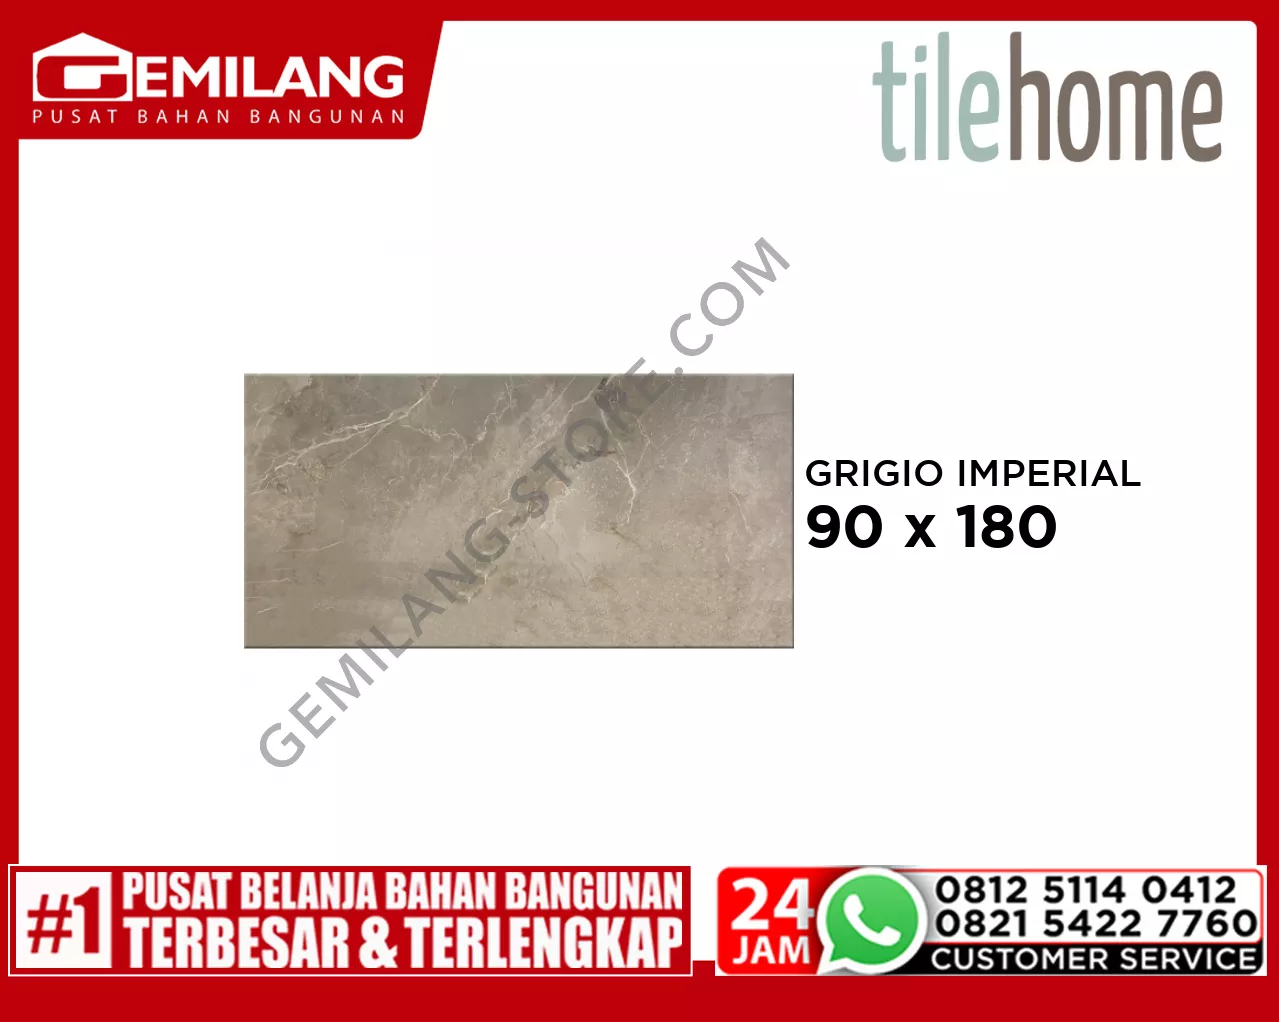 TILEHOME GRANIT GRIGIO IMPERIALE RK189H103A 90 x 180